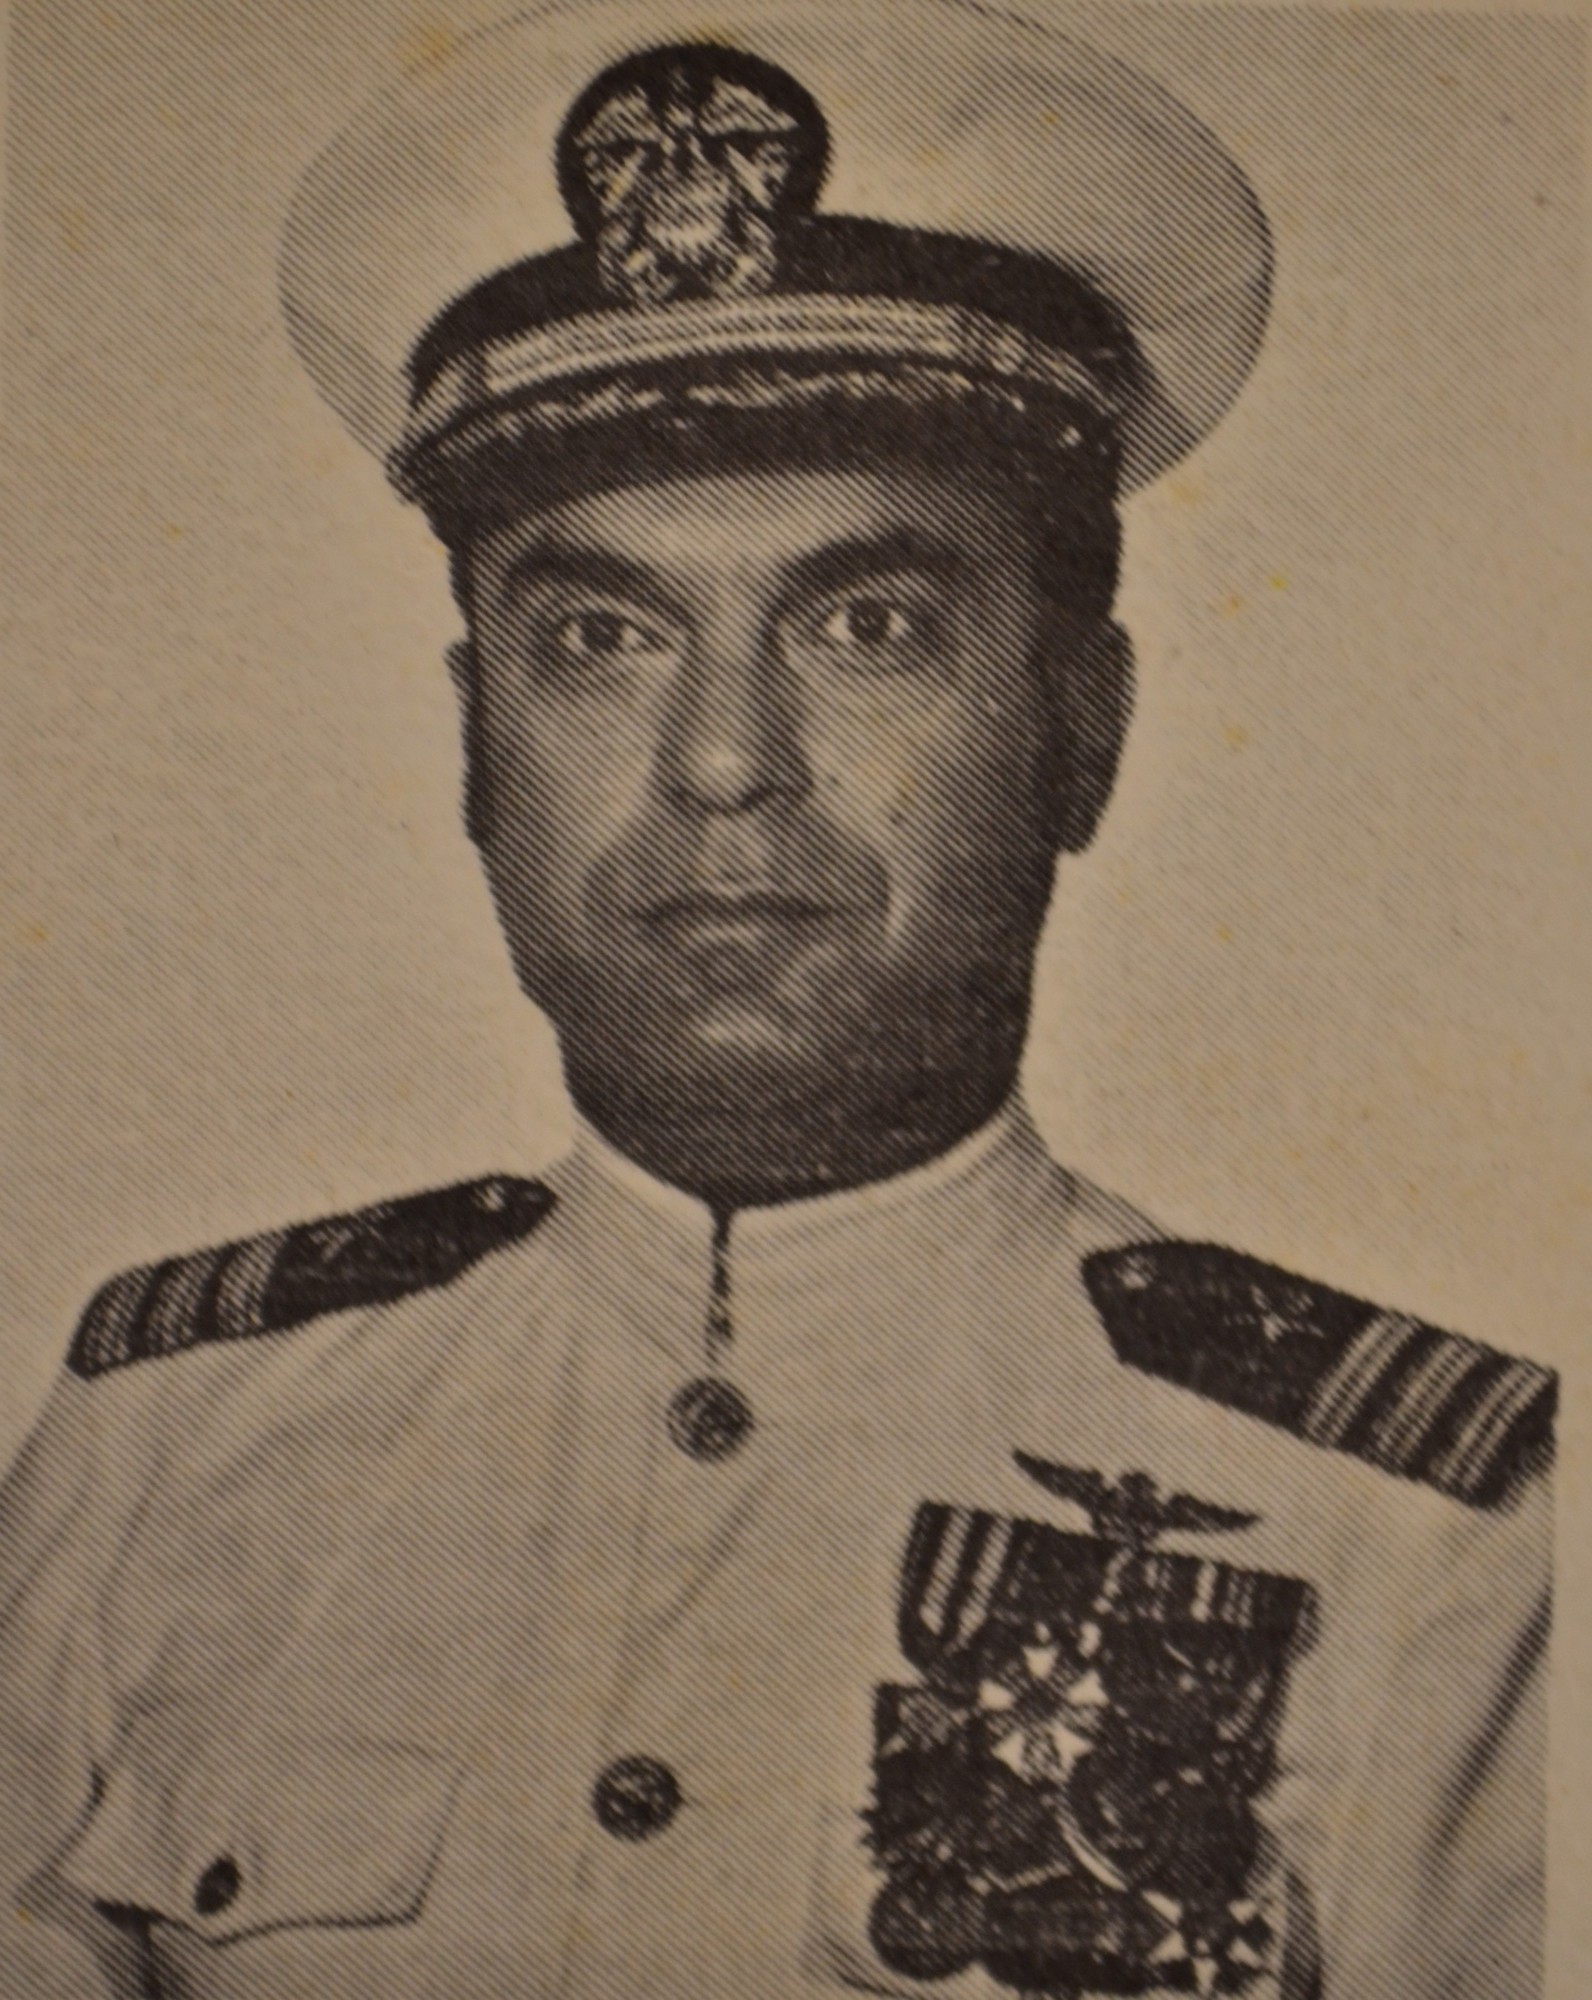 Retired Capt. Leo Hyatt served in the Navy from 1957 to 1986 after graduating from the Naval Academy. Courtesy photo.